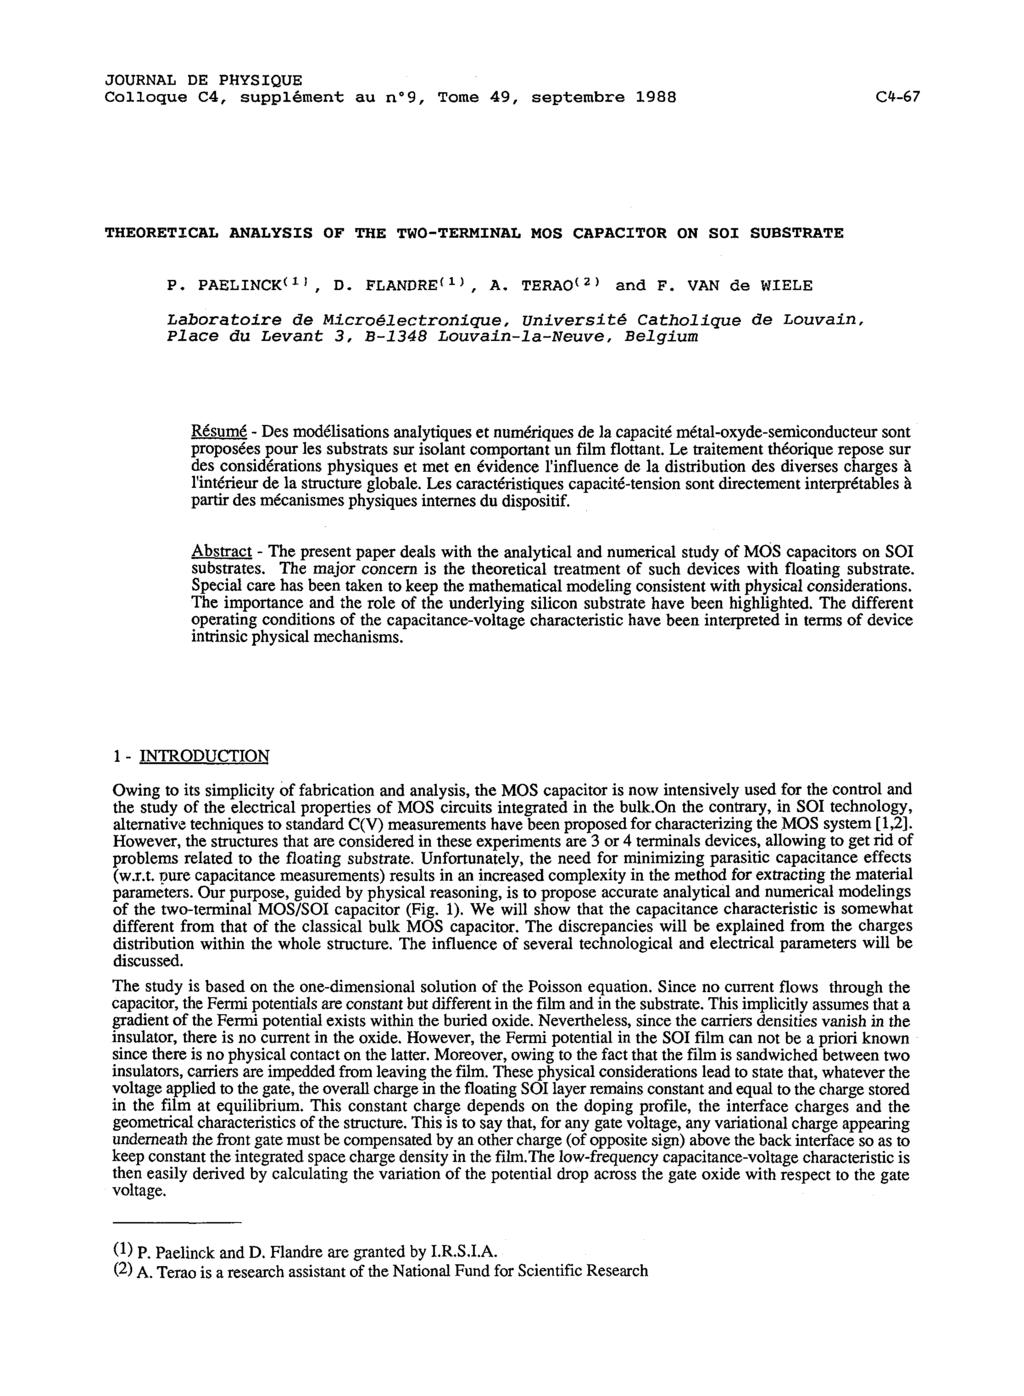 Colloque C4, supplkment au n09, Tome 49, septembre 1988 THEORETICAL ANALYSIS OF THE TWO-TERMINAL MOS CAPACITOR ON SO1 SUBSTRATE P. PAELINCK(*~, D. FLANDRE(~), A. TERAO(~) and F.